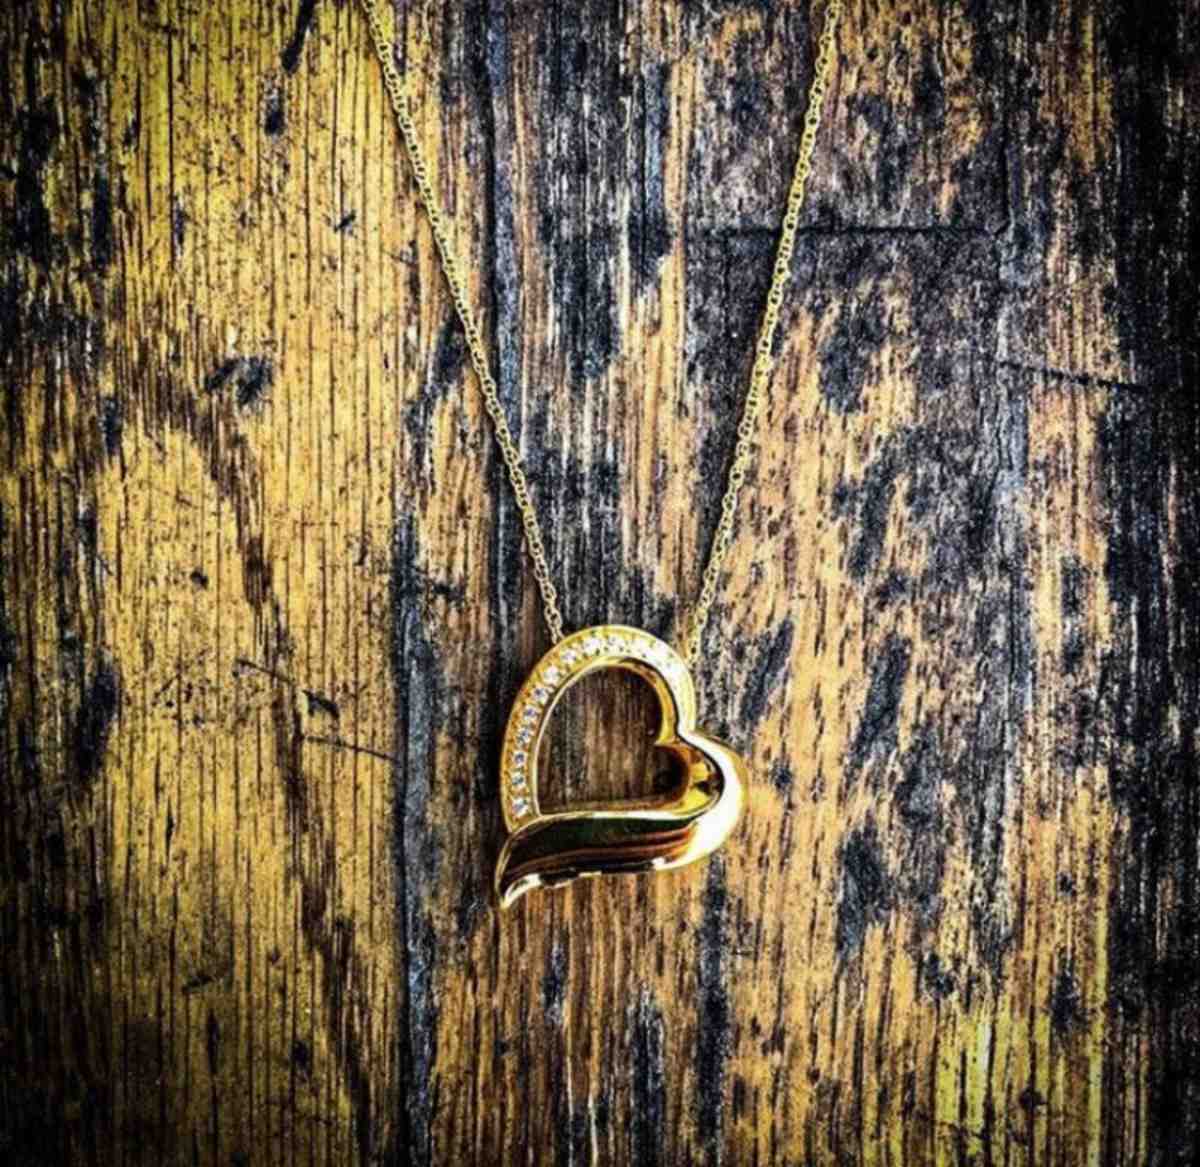 Gold heart cremation jewelry pendant.